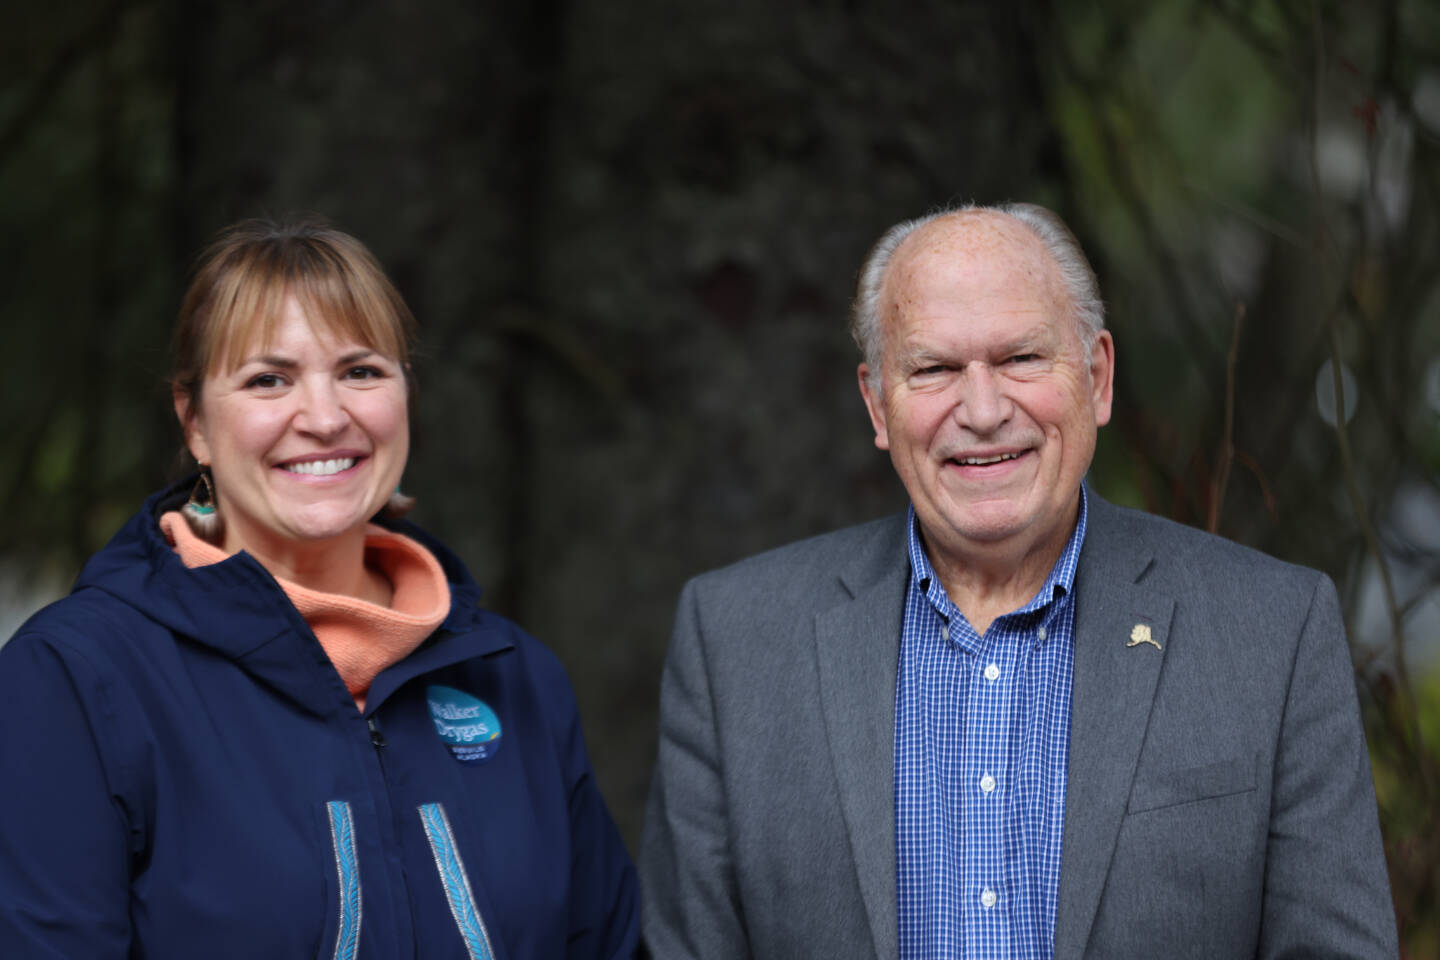 Hedi Drygas, who is running for lieutenant governor, and Bill Walker, who is running for governor, are photographed outside the Juneau Empire’s offices in October 2022. (Ben Hohenstatt/Juneau Empire)